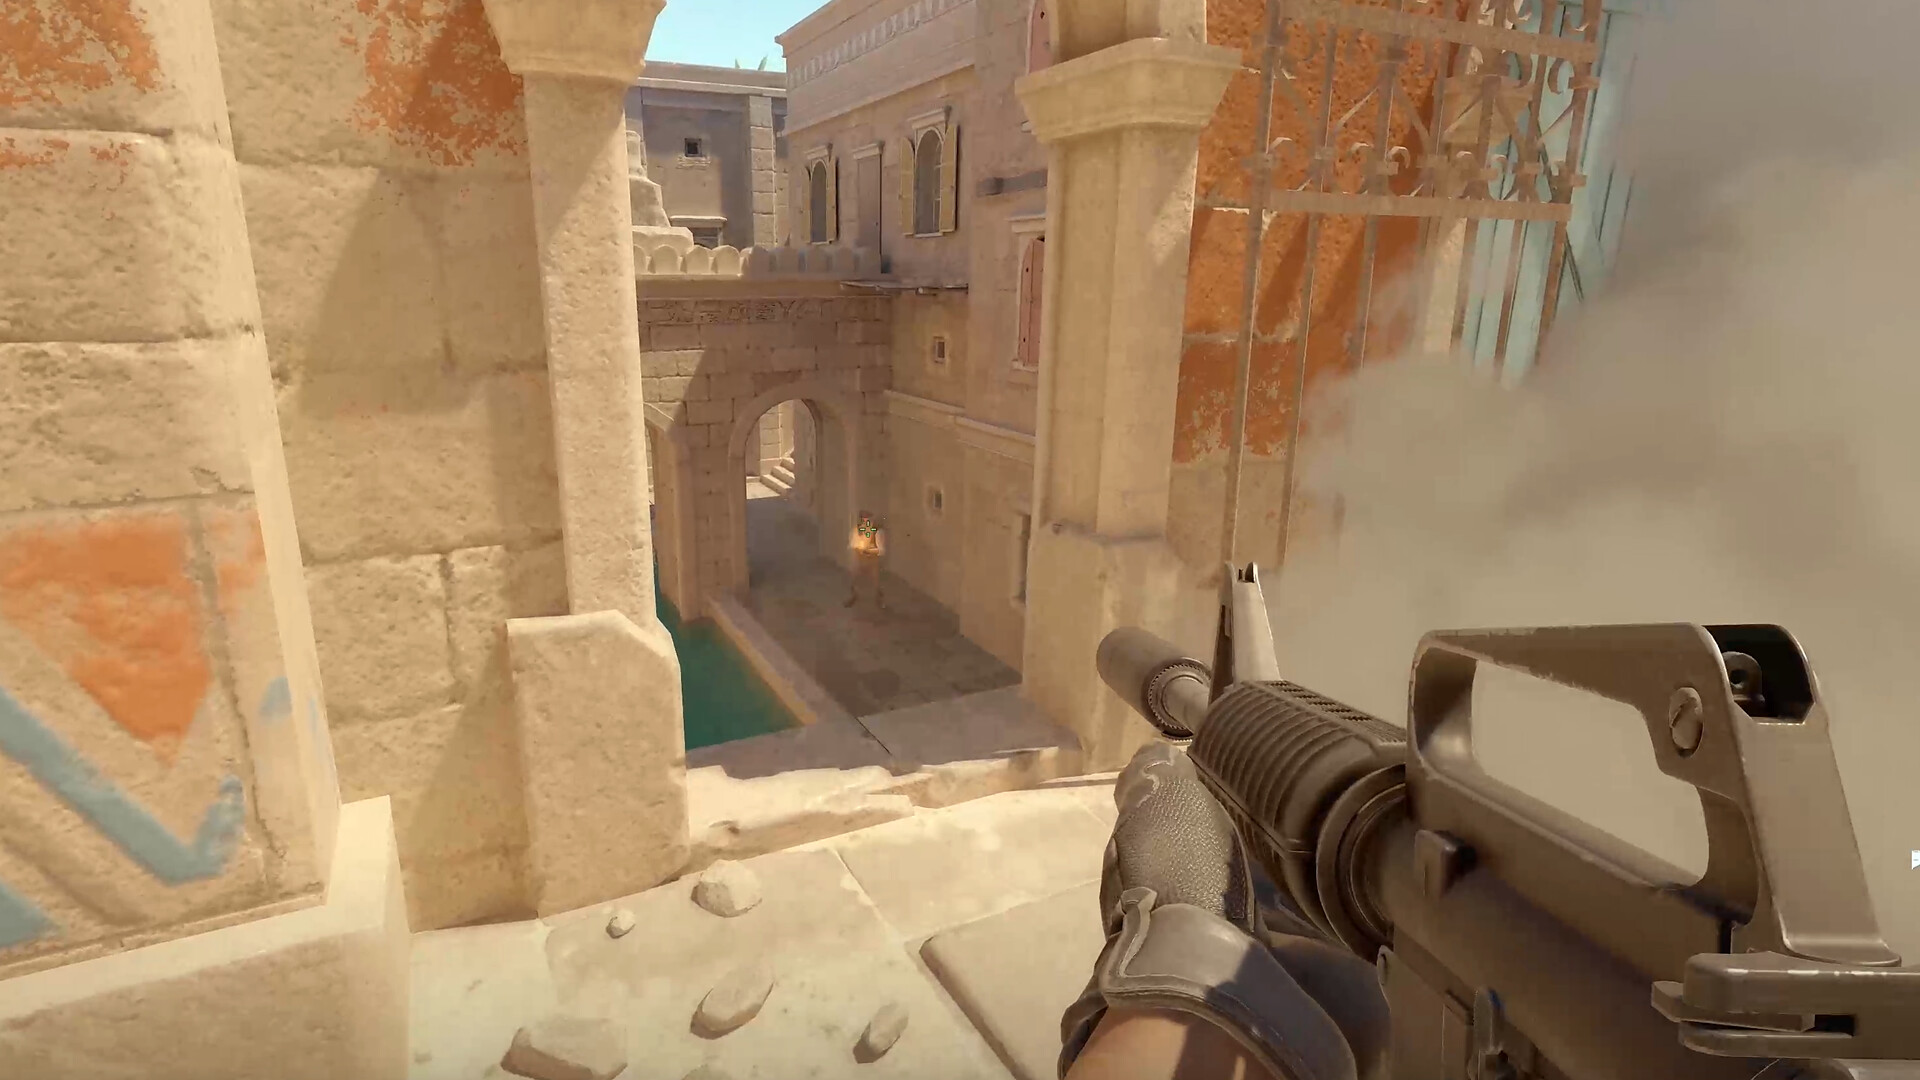 Counter-Strike 2 update: A soldier fires an M4 rifle in Valve FPS game Counter-Strike 2